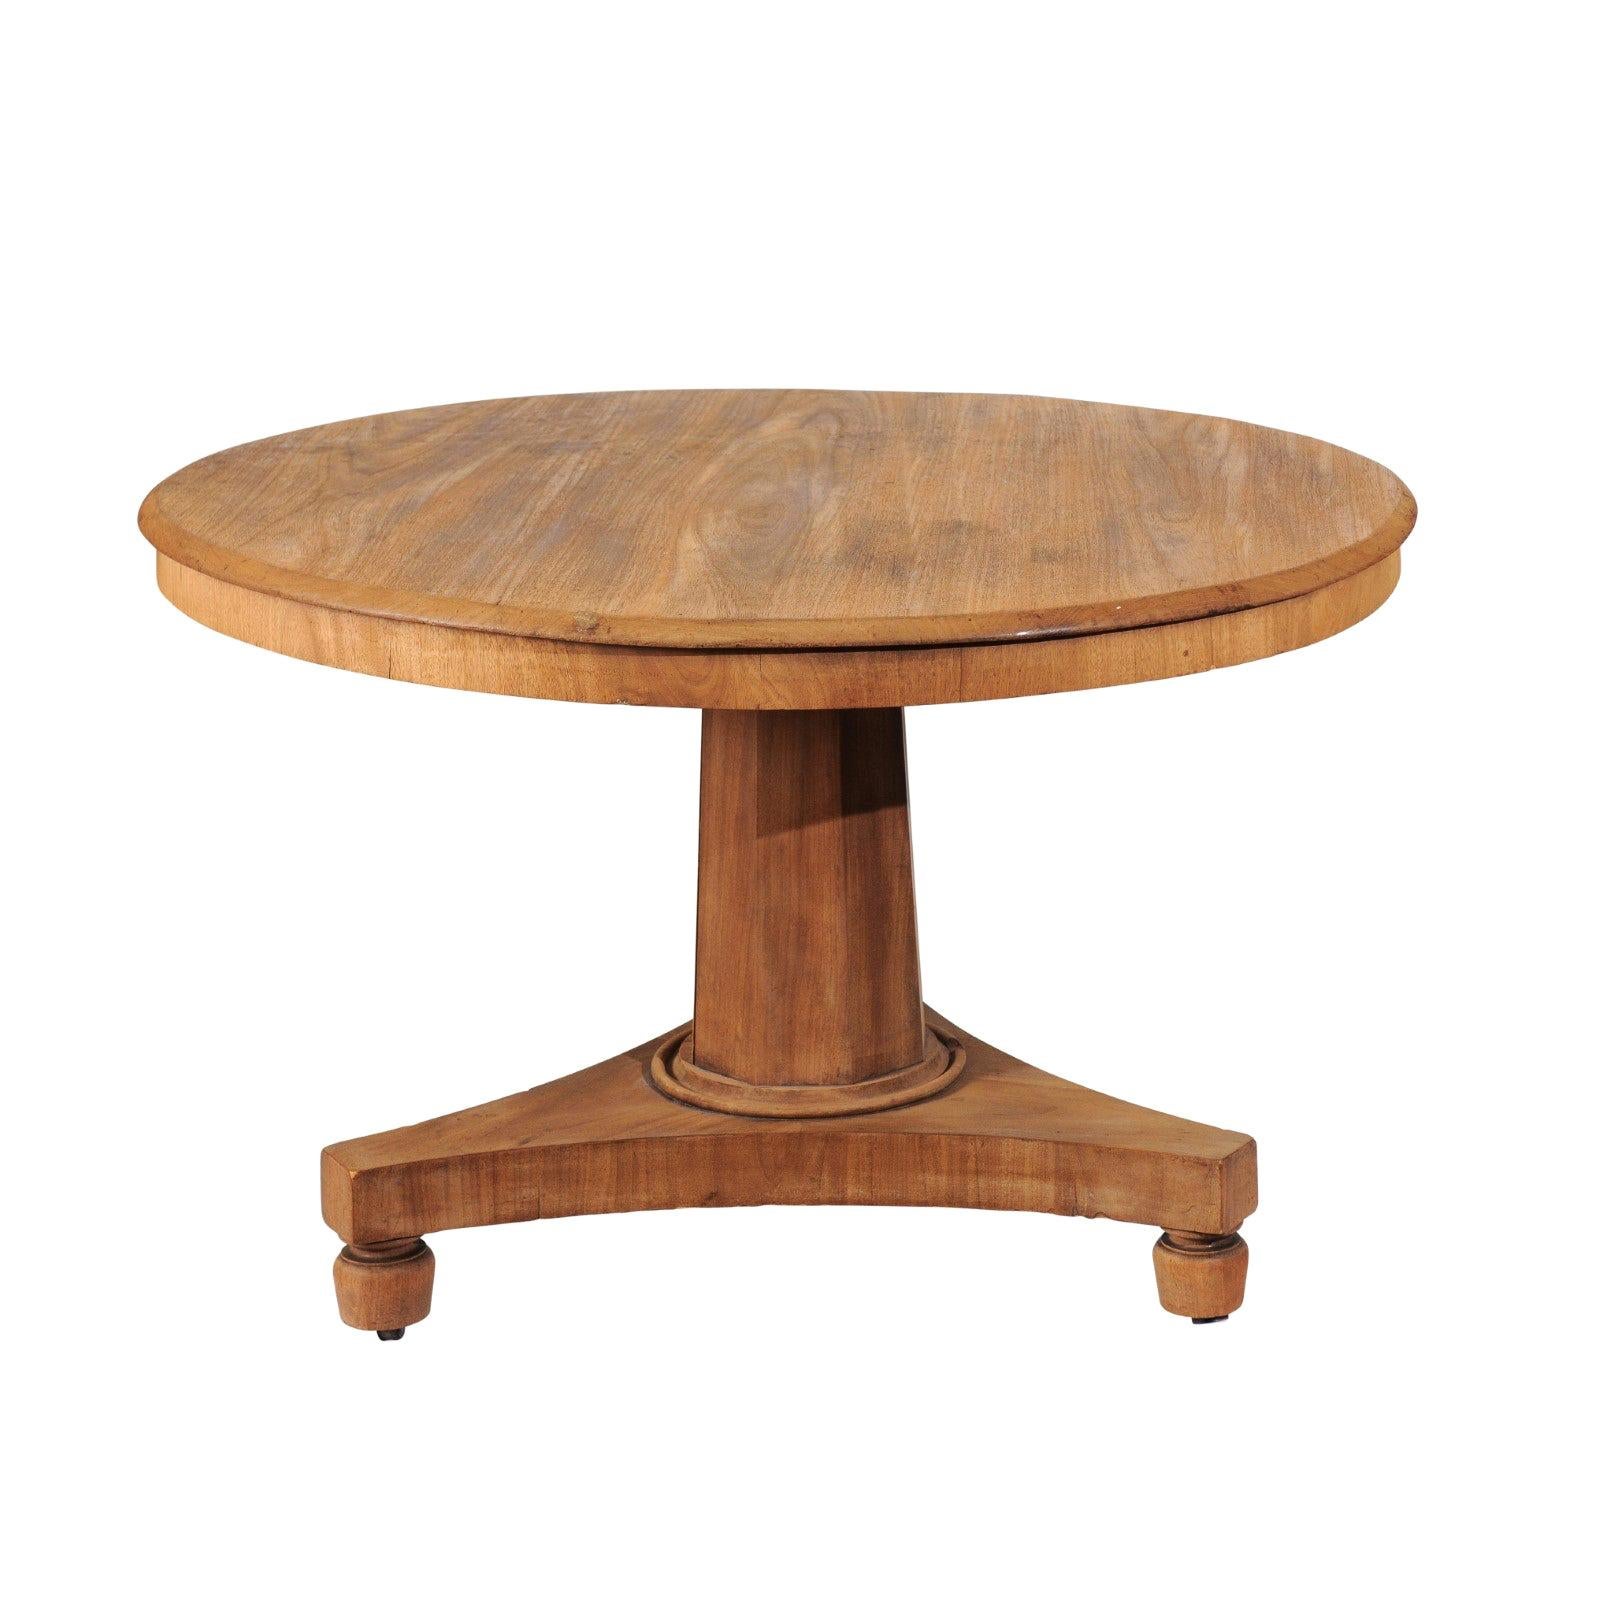 19th Century Biedermeir-Style Round Pedestal Dining Table or Center Table